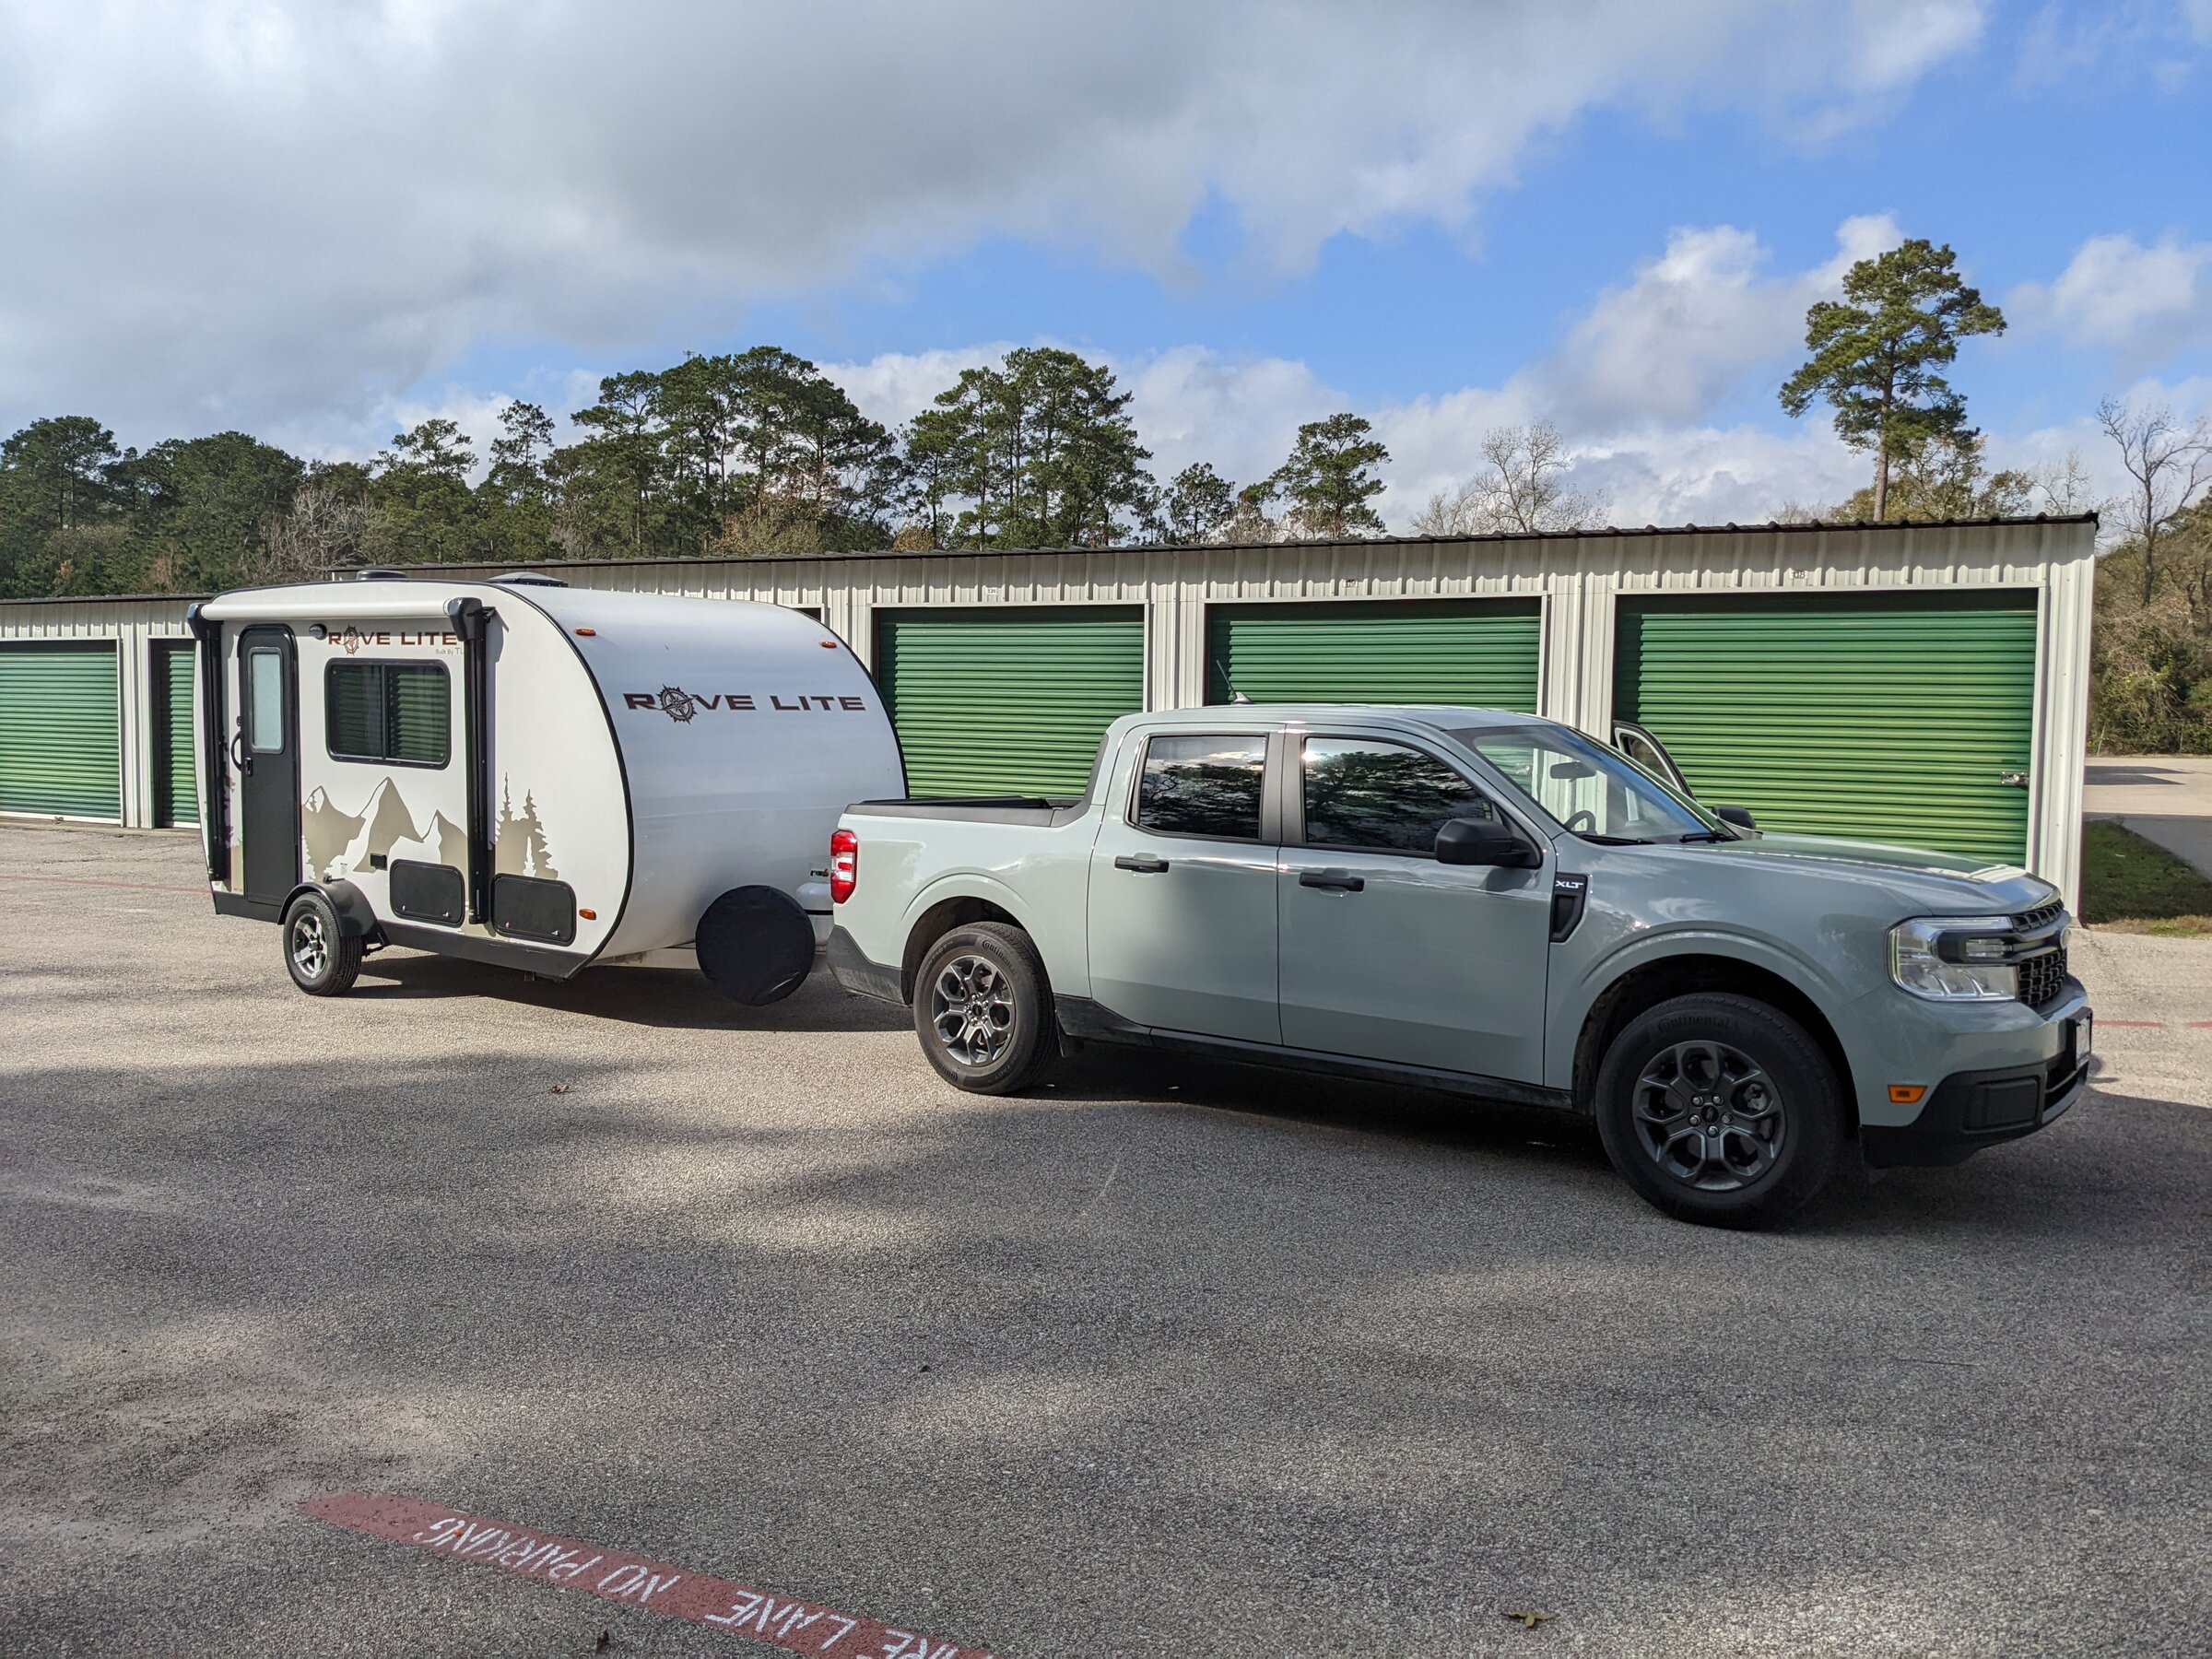 Maverick Travel Trailer Towing and 1300 Mile Review